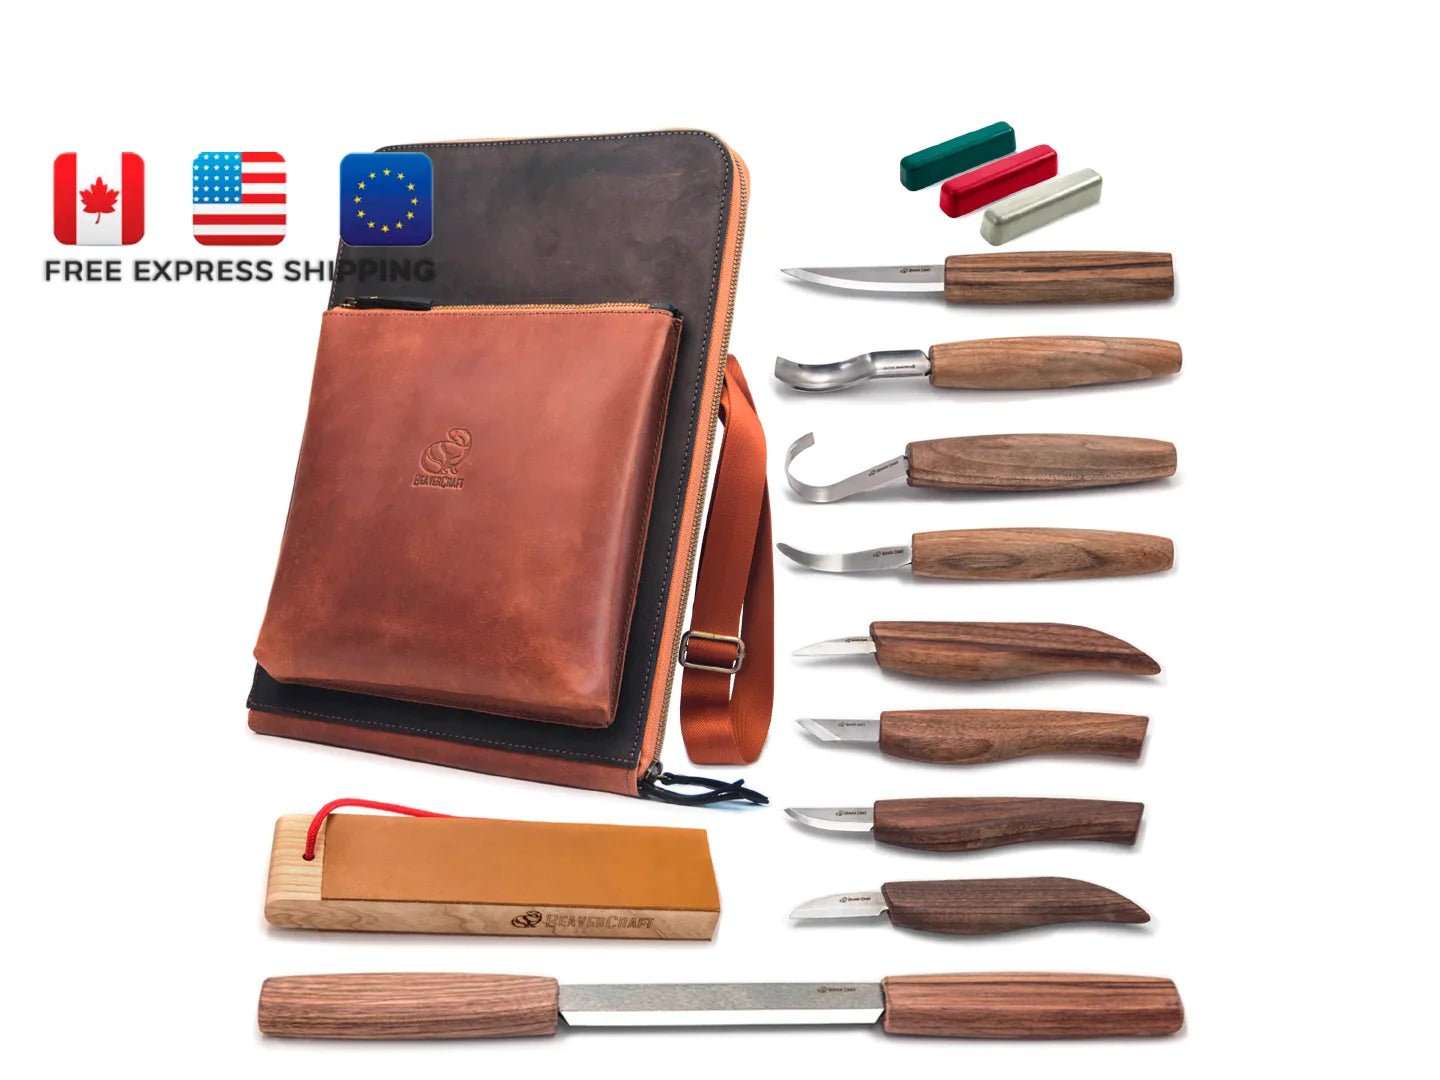 BeaverCraft S50X Deluxe Large Wood Carving Tool Set With Walnut Handles